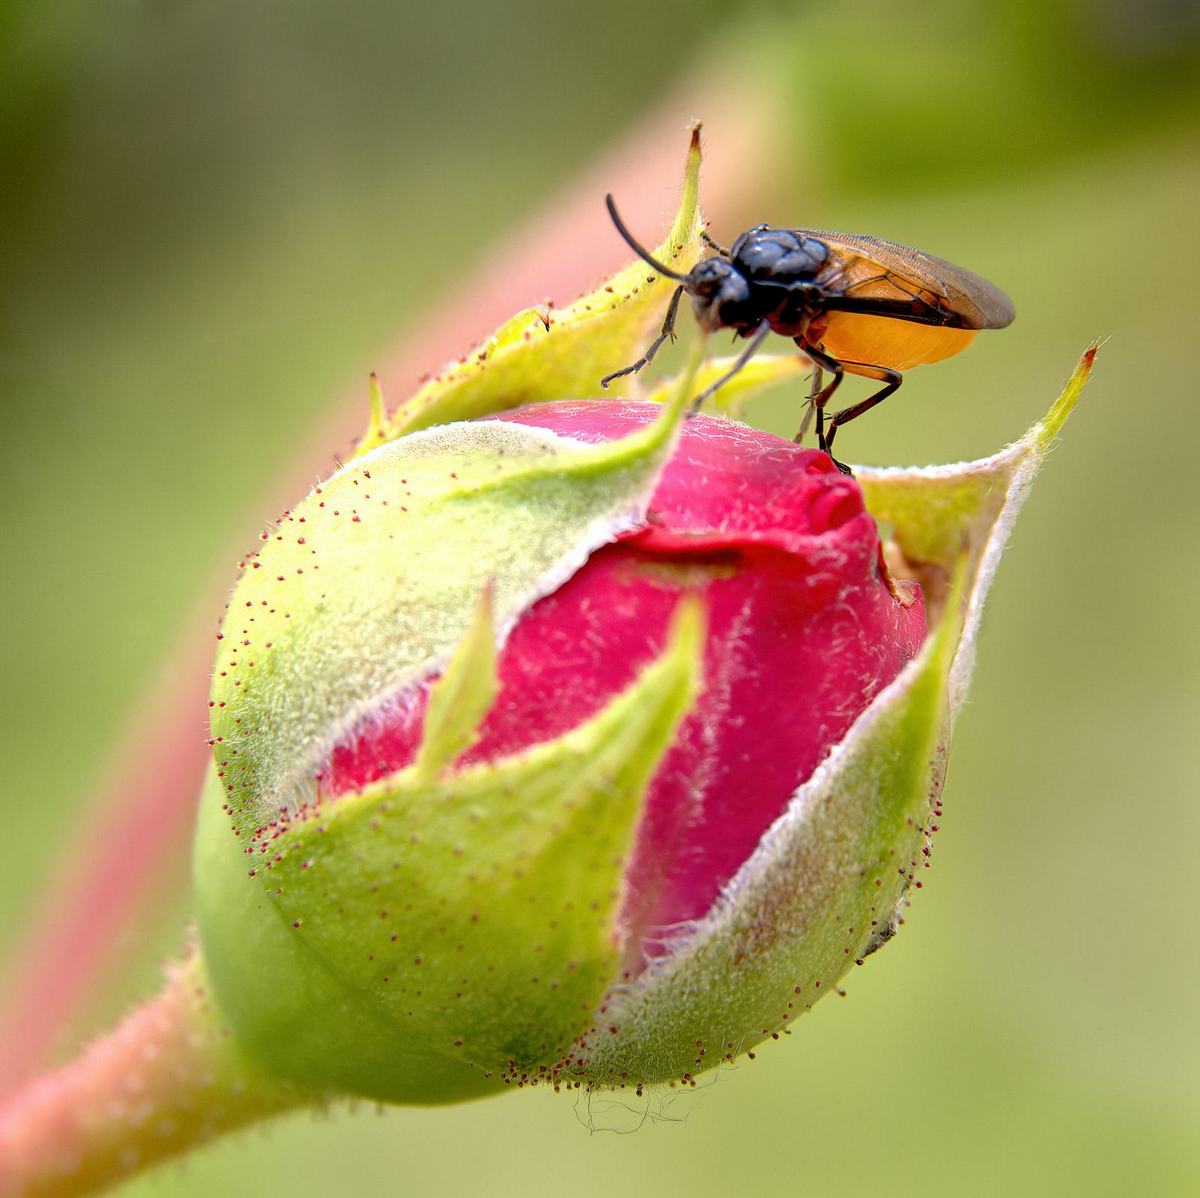 Insect on rose bud by Stuart Ord